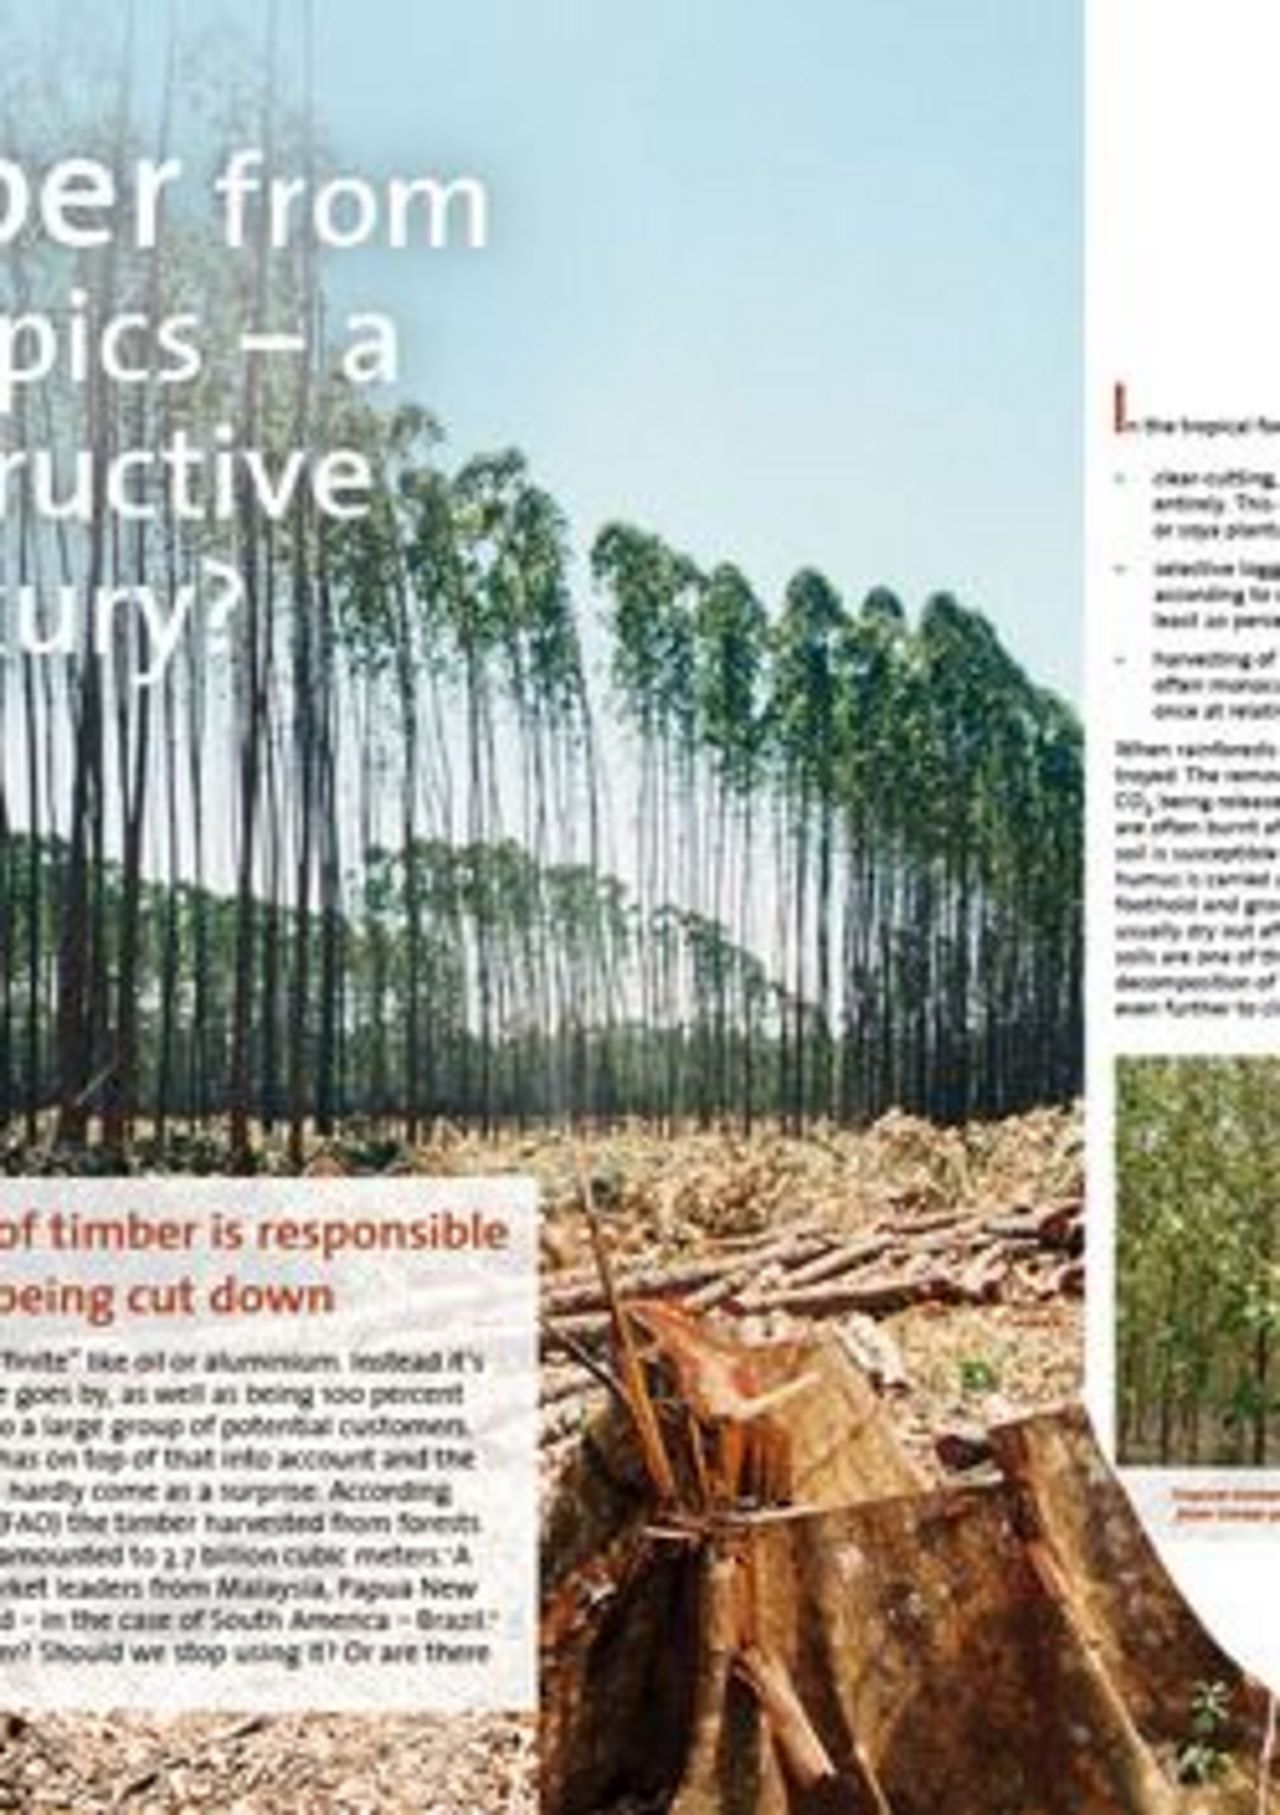 Policy Paper "Timber from the Tropics - A destructive luxury?" - Factsheet by OroVerde 